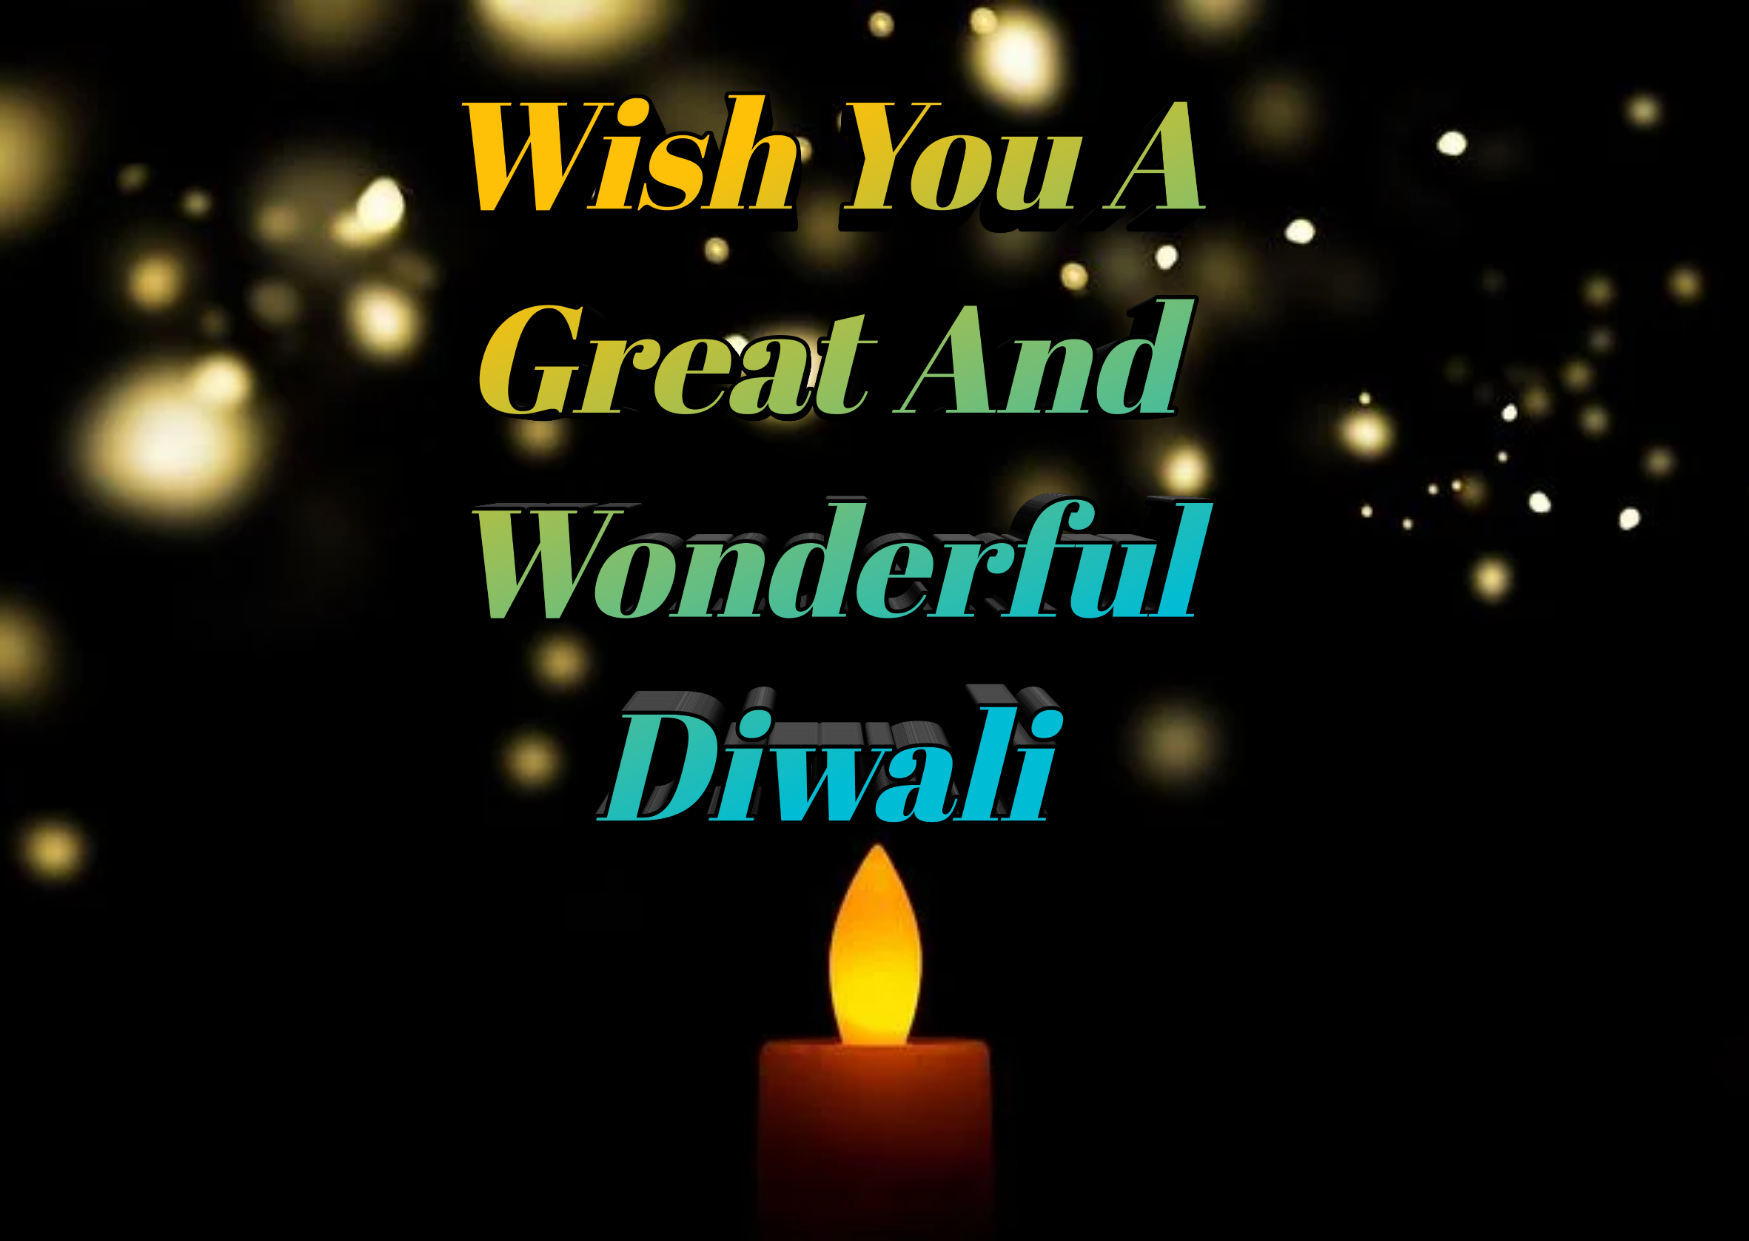 Happy Diwali Wishes 2021 Images, quotes, status, greeting for whatsapp free download,